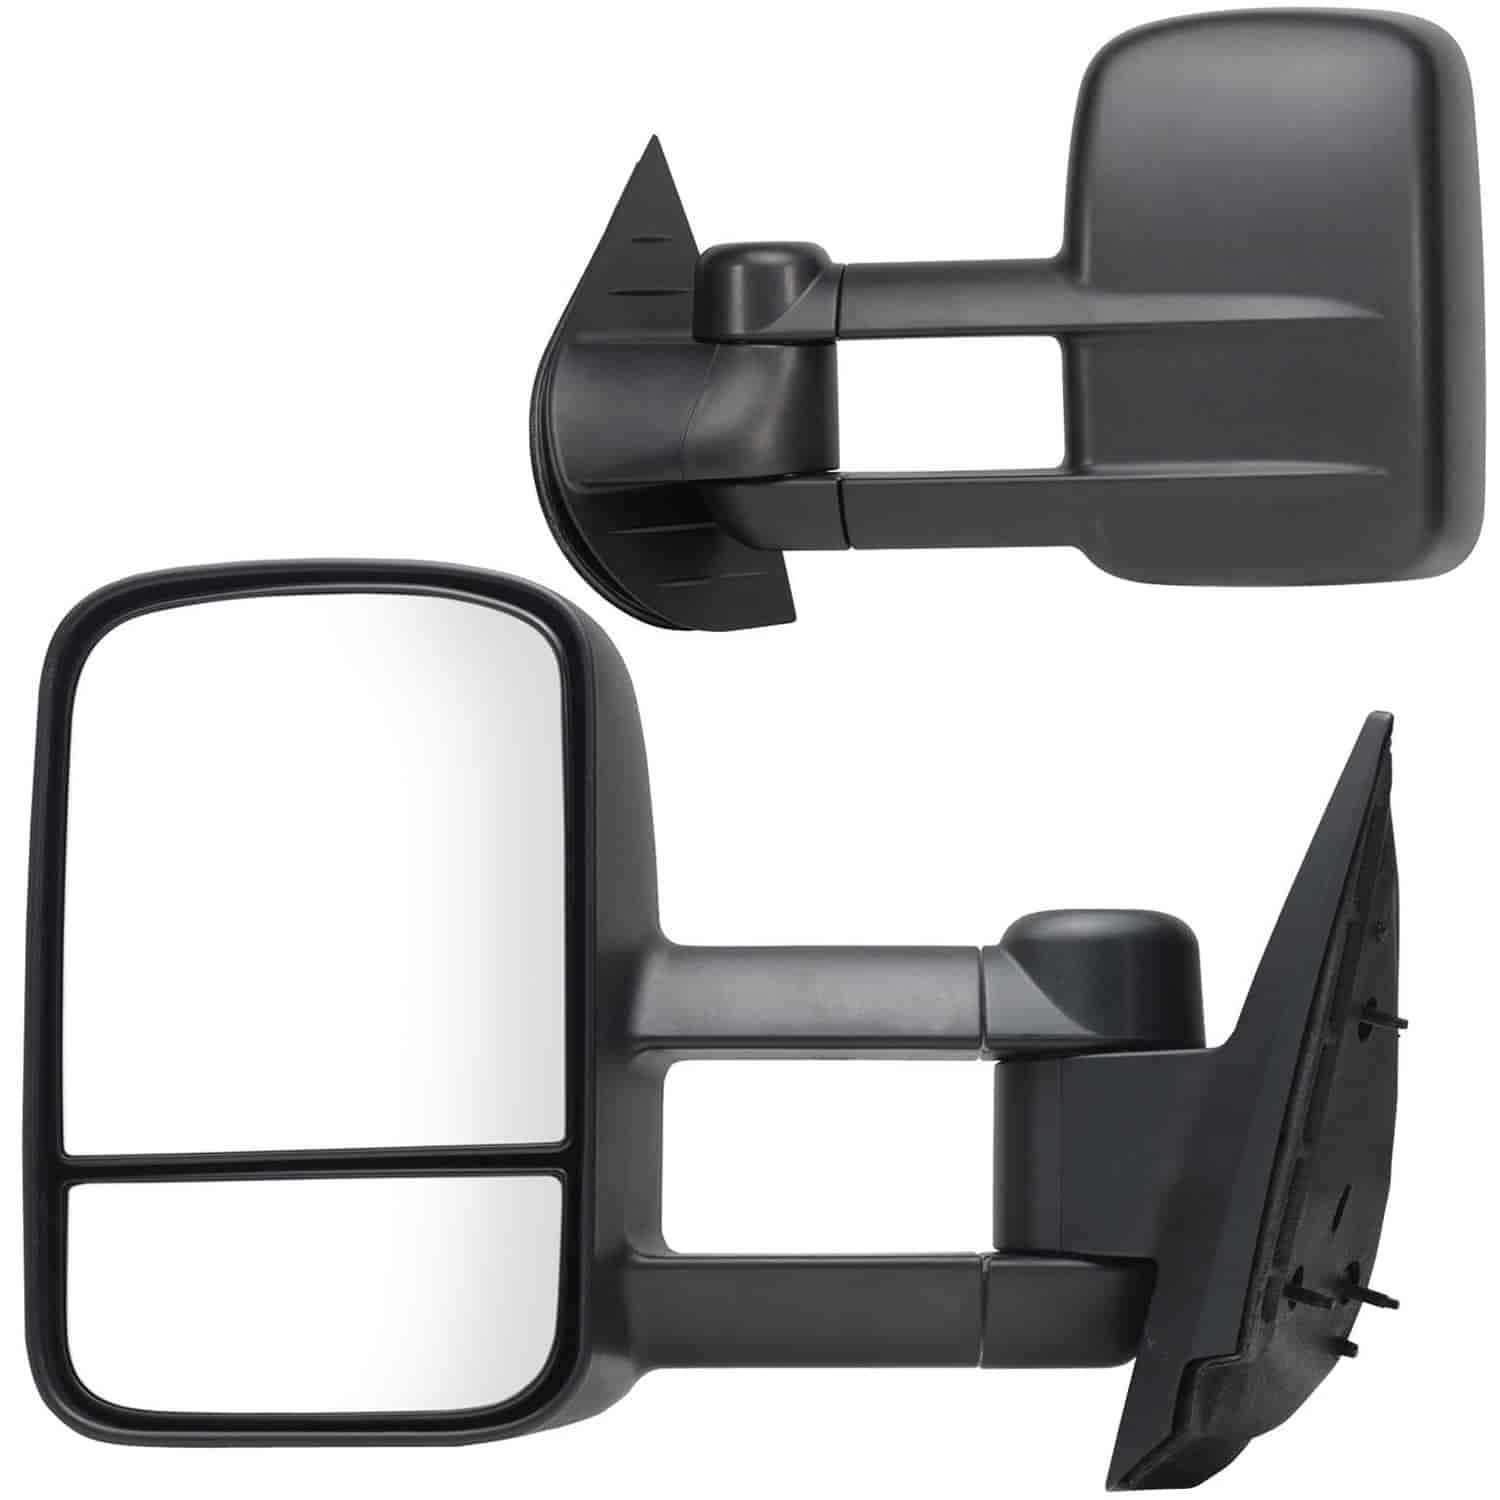 OEM Style Replacement Mirror Fits 2007 to 2014 Chevy Silverado & GMC Sierra